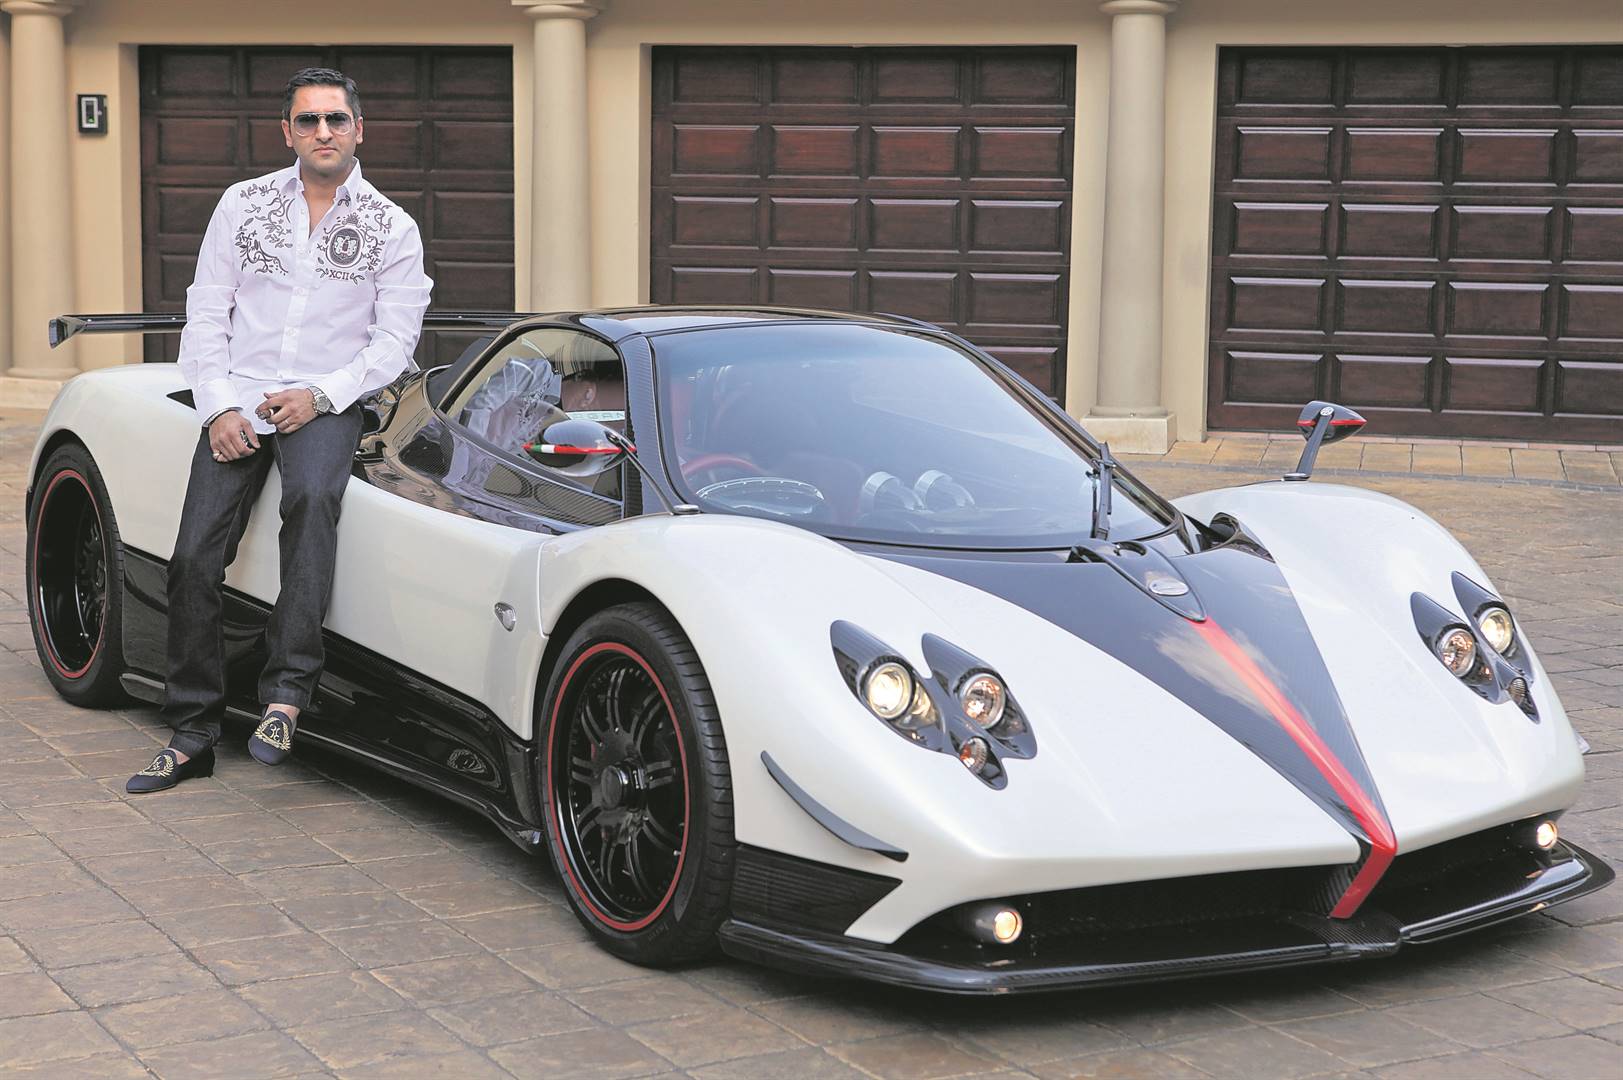  Controversial businessperson Zunaid Moti with his limited edition R20 million Pagani Zonda at his home in Johannesburg, a few years ago. He founded luxury car dealership Future Exotics Lifestyle Emporium Photo:Gallo images